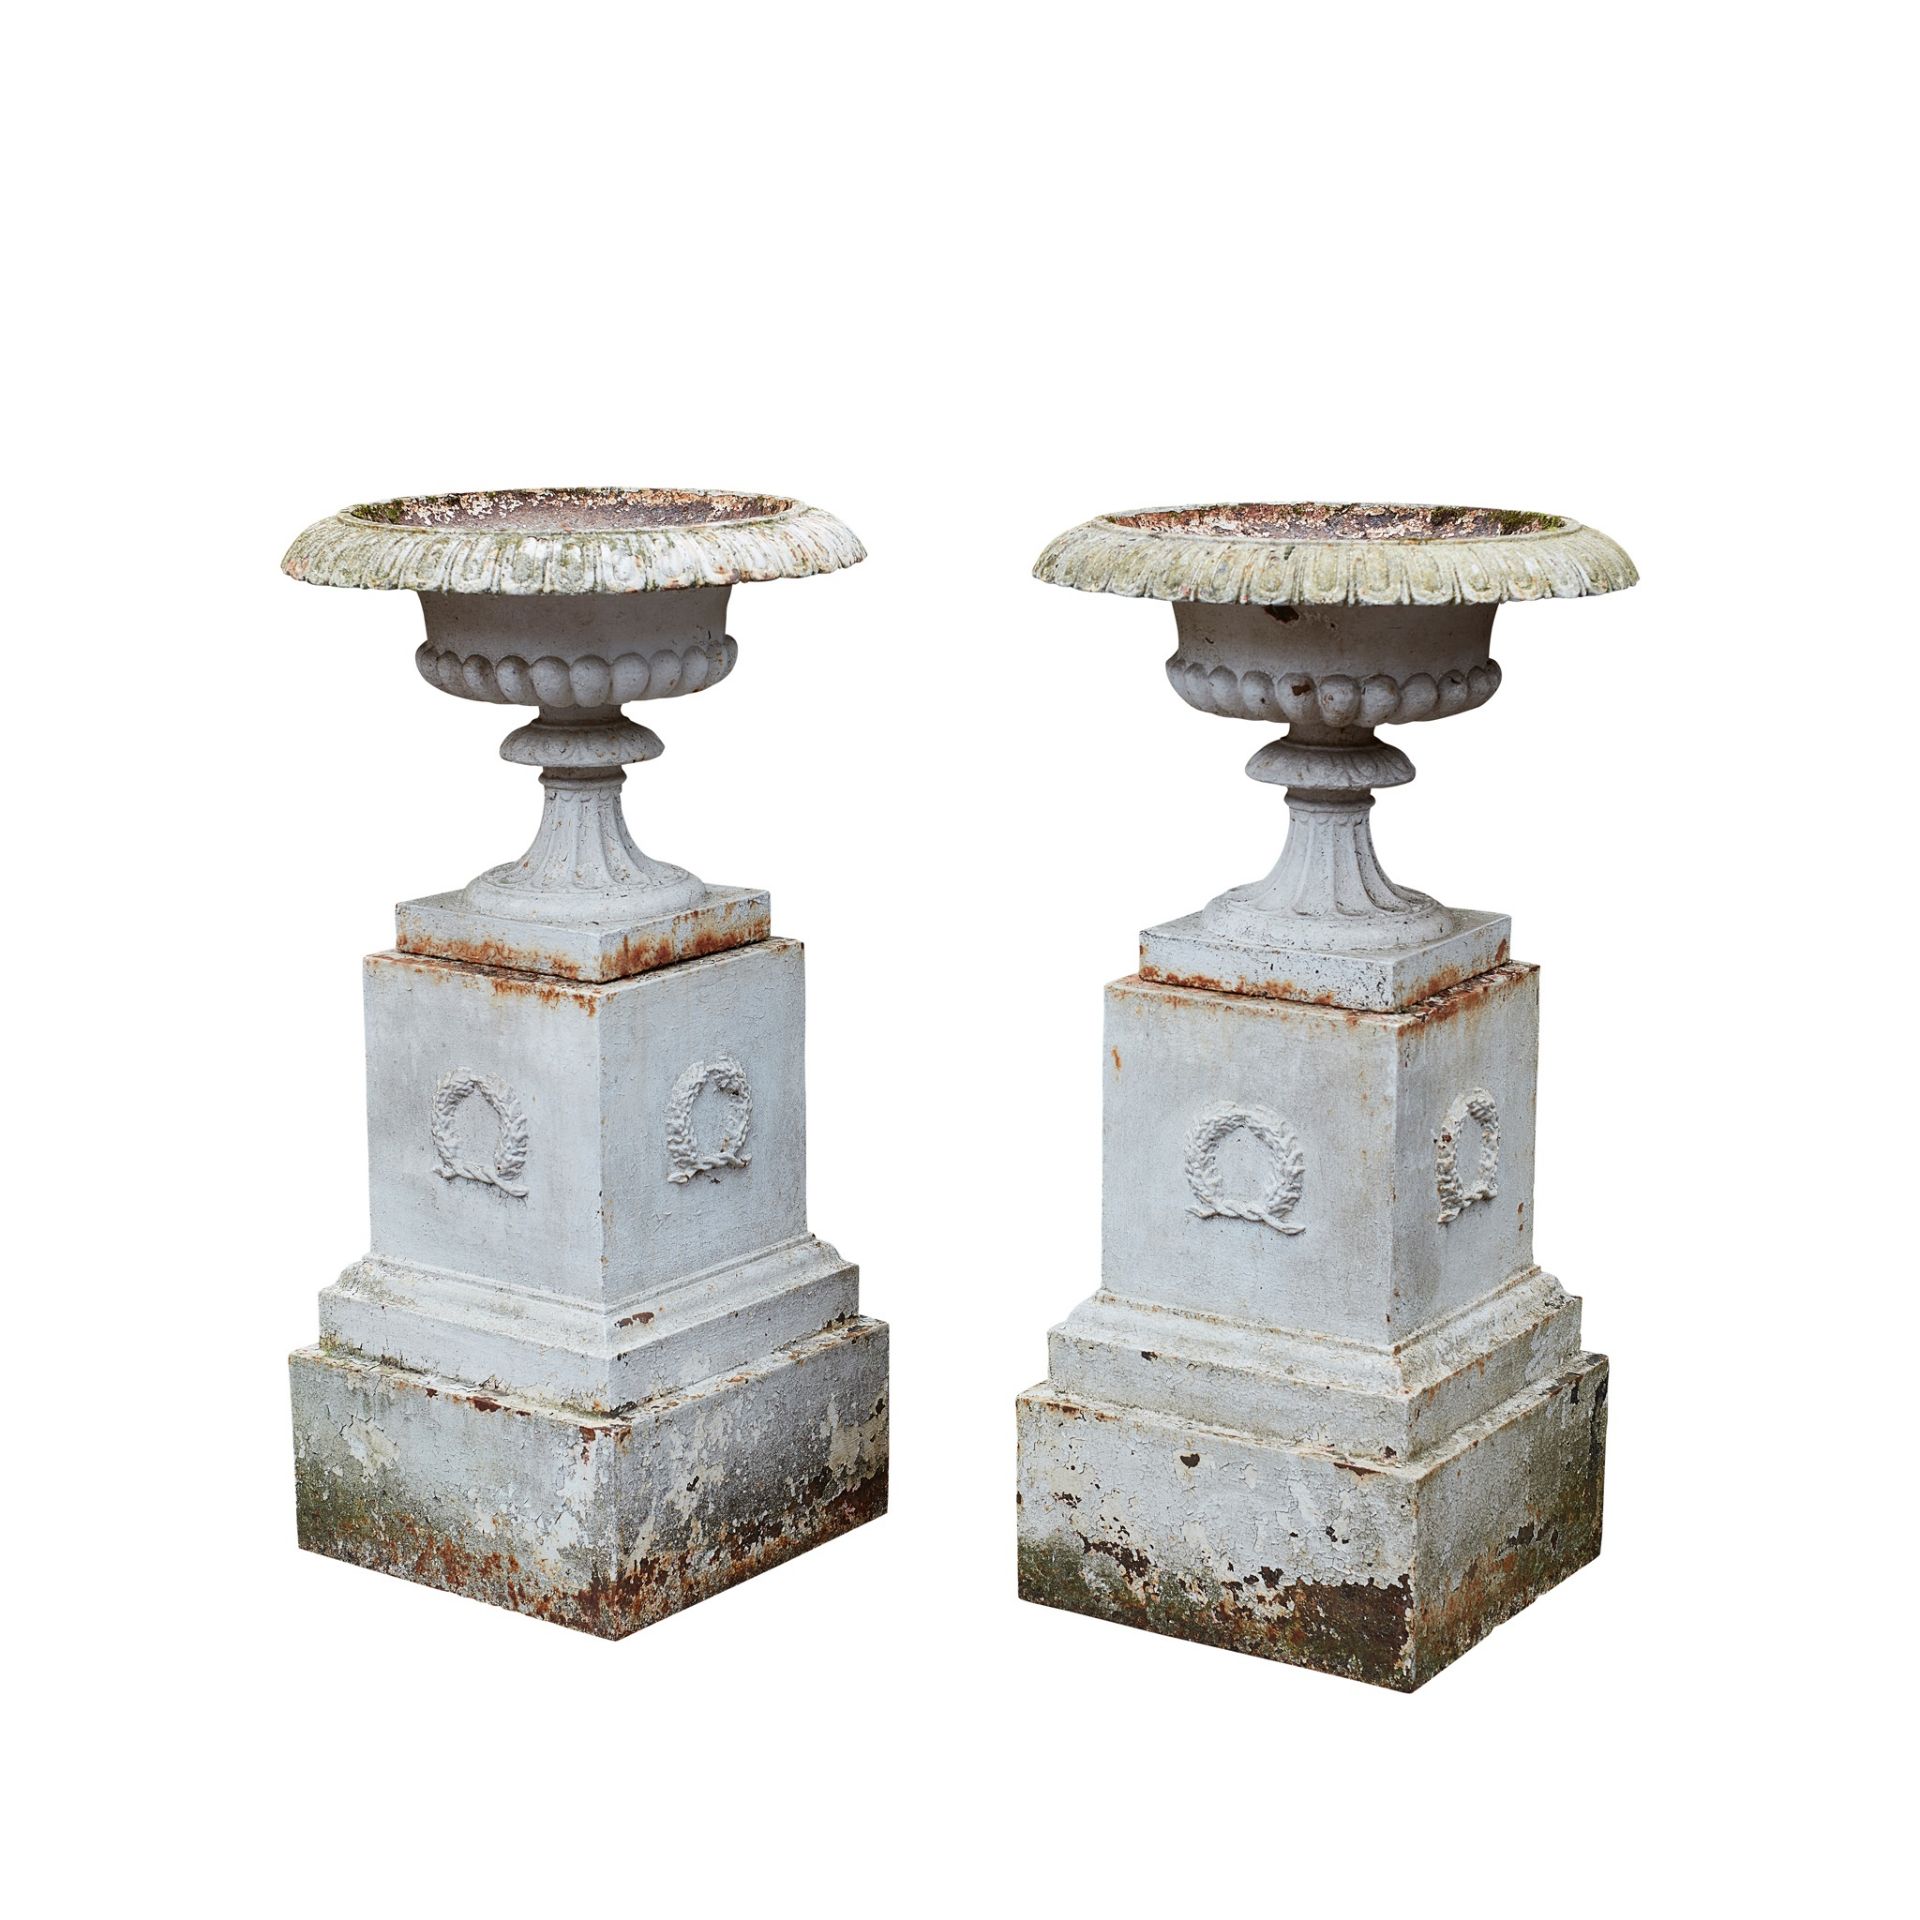 PAIR OF WHITE PAINTED CAST IRON URNS AND STANDS 19TH CENTURY